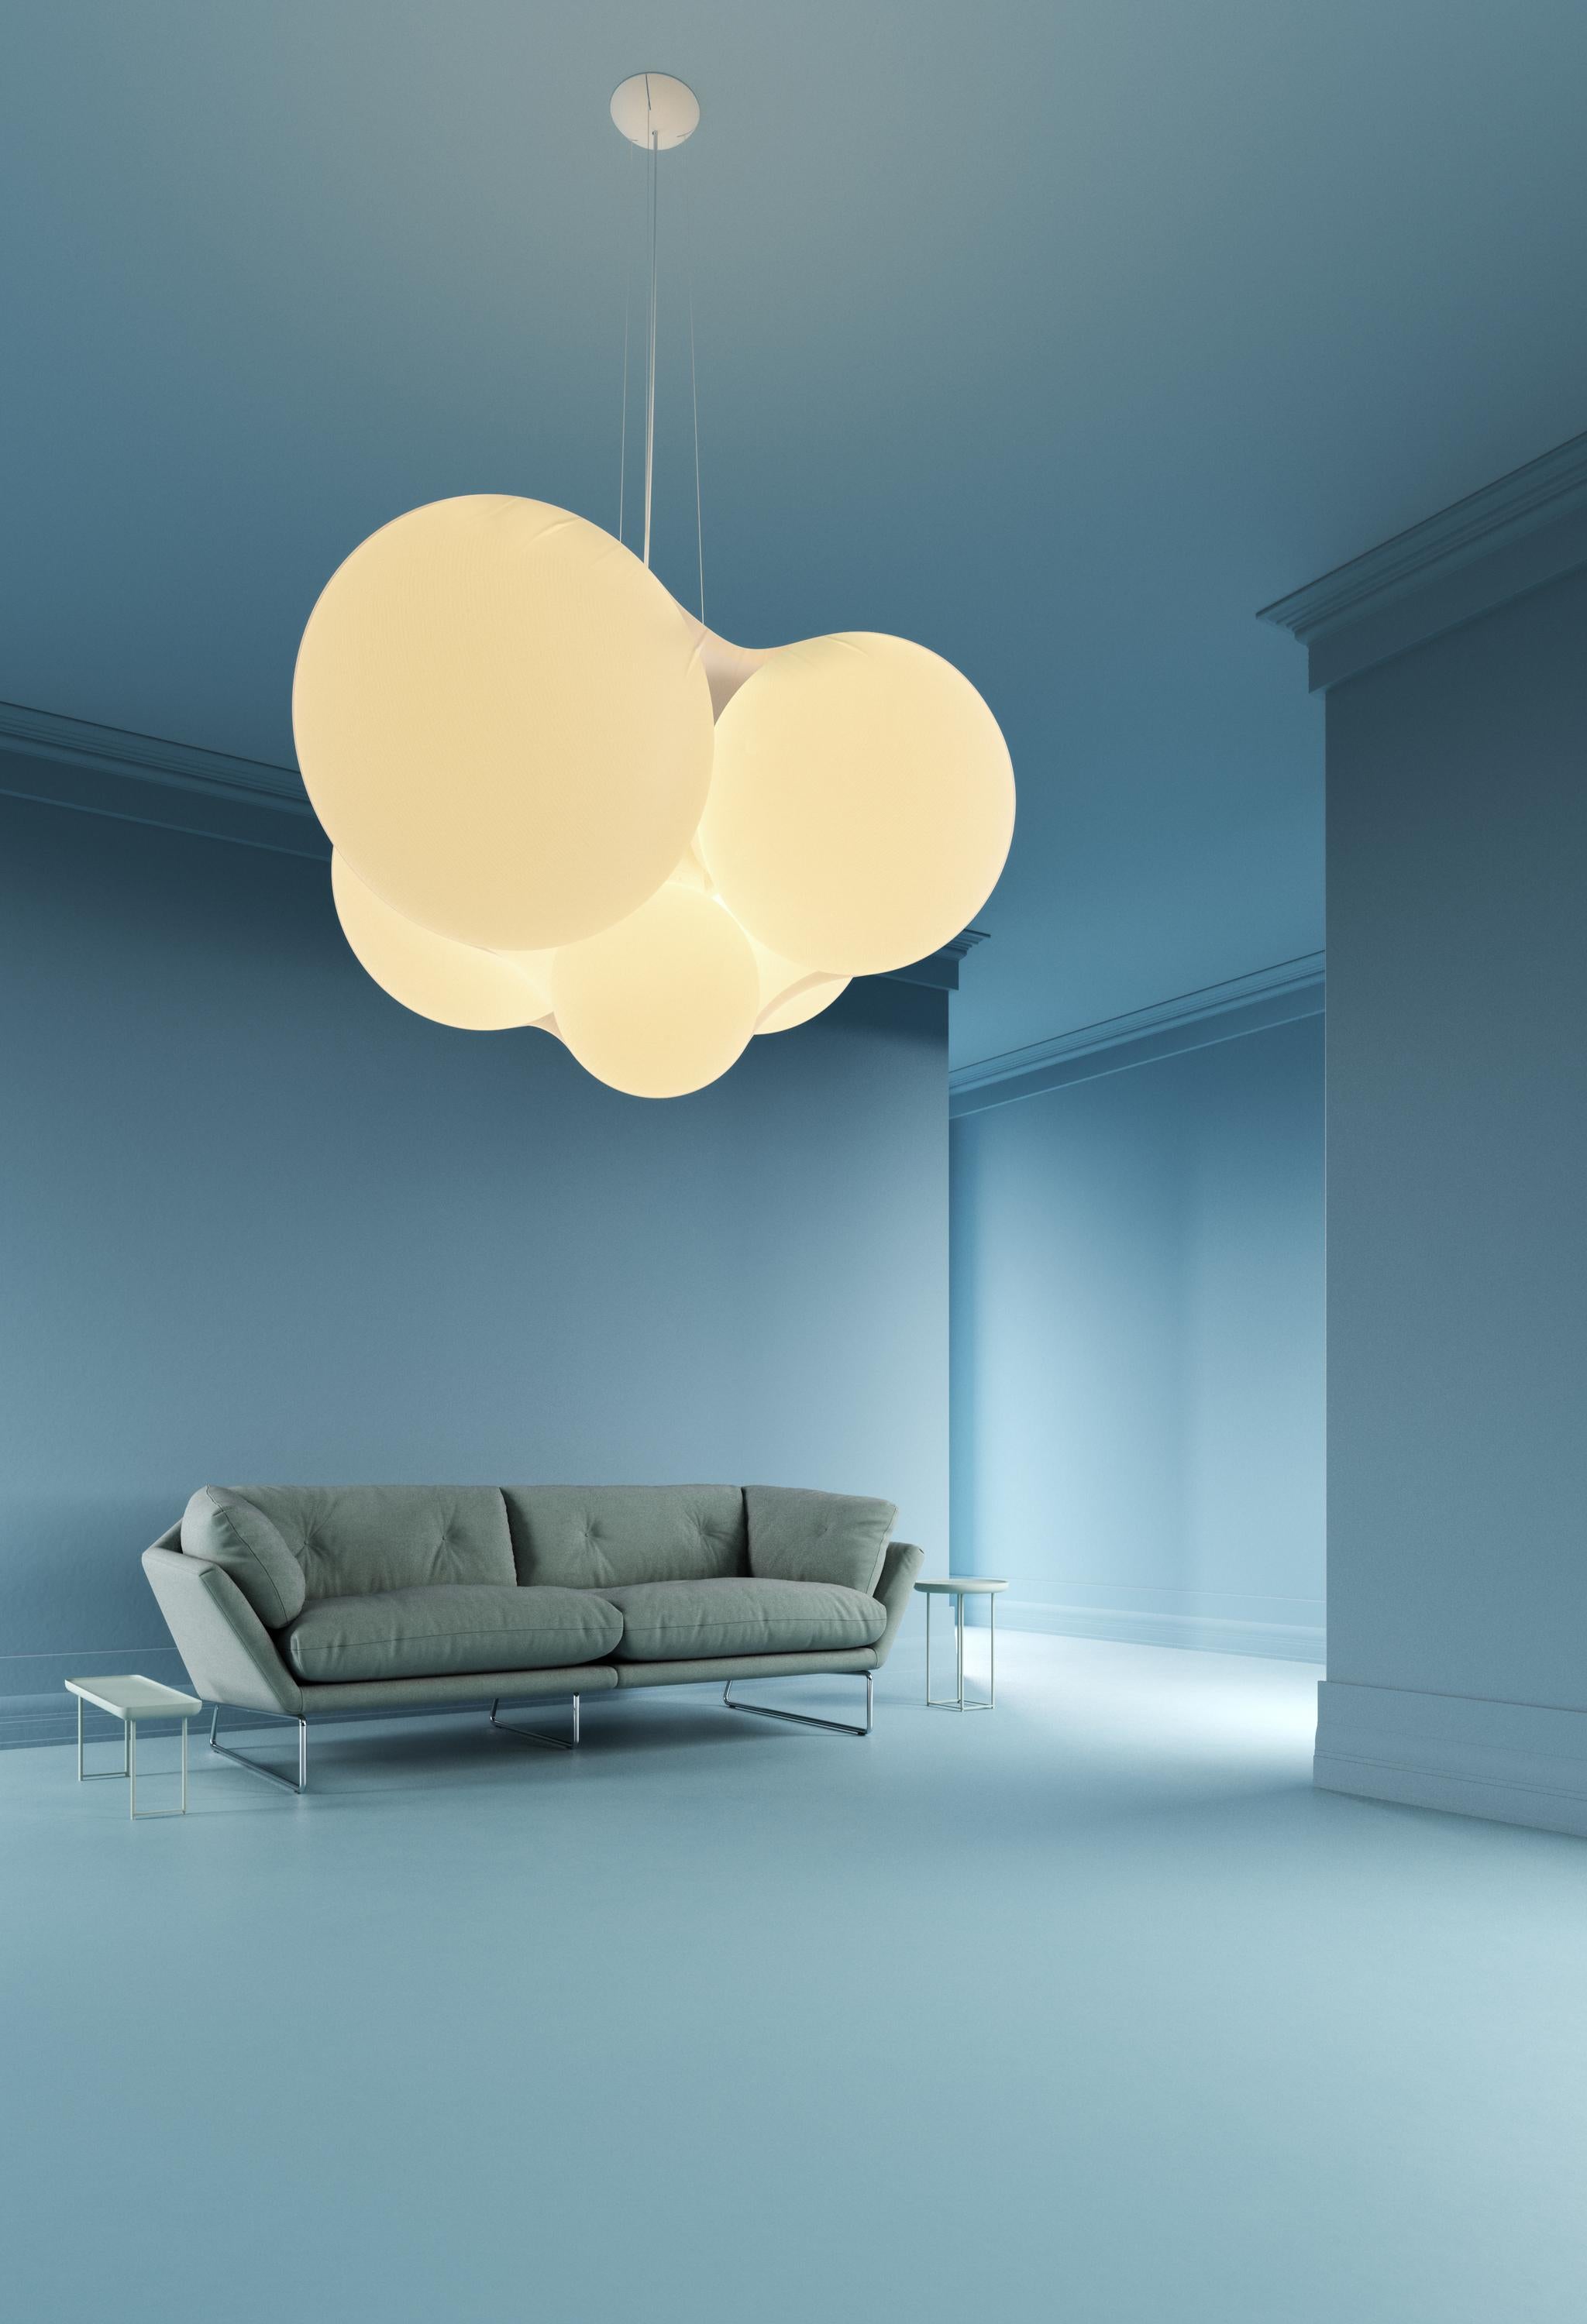 Axolight Cloudy Large Pendant Lamp in White by Dima Loginoff

Between design and art. Cloudy evokes a prodigious contemporary and luminous sculpture. It dominates the space with its strong installation power and a fluctuating stage presence of great